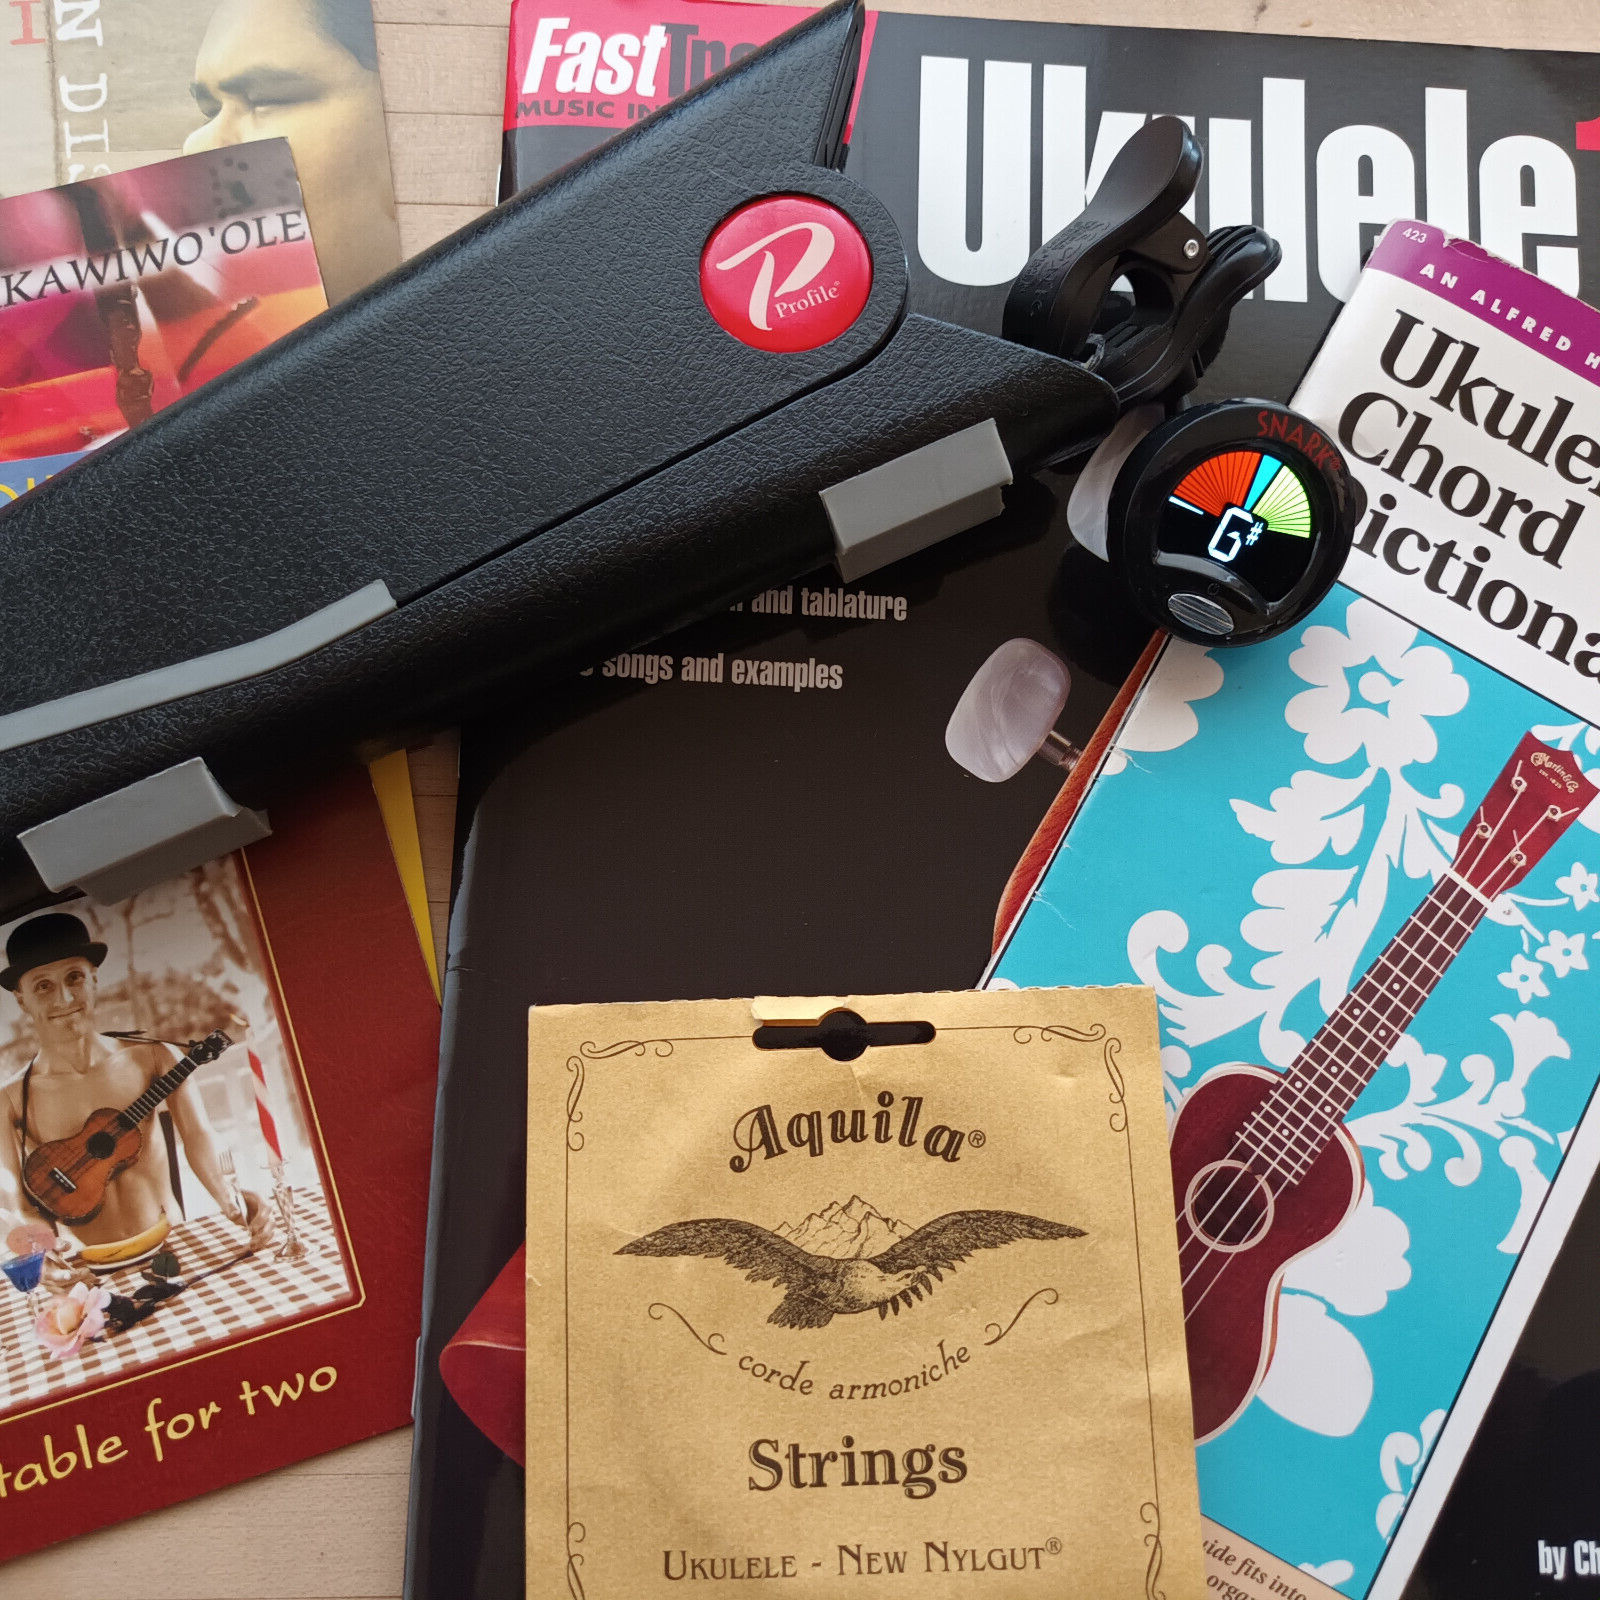 Ukulele Bundle-Books, Snark Tuner-Stand-Strings-4xCD's-Everything perfect cond.